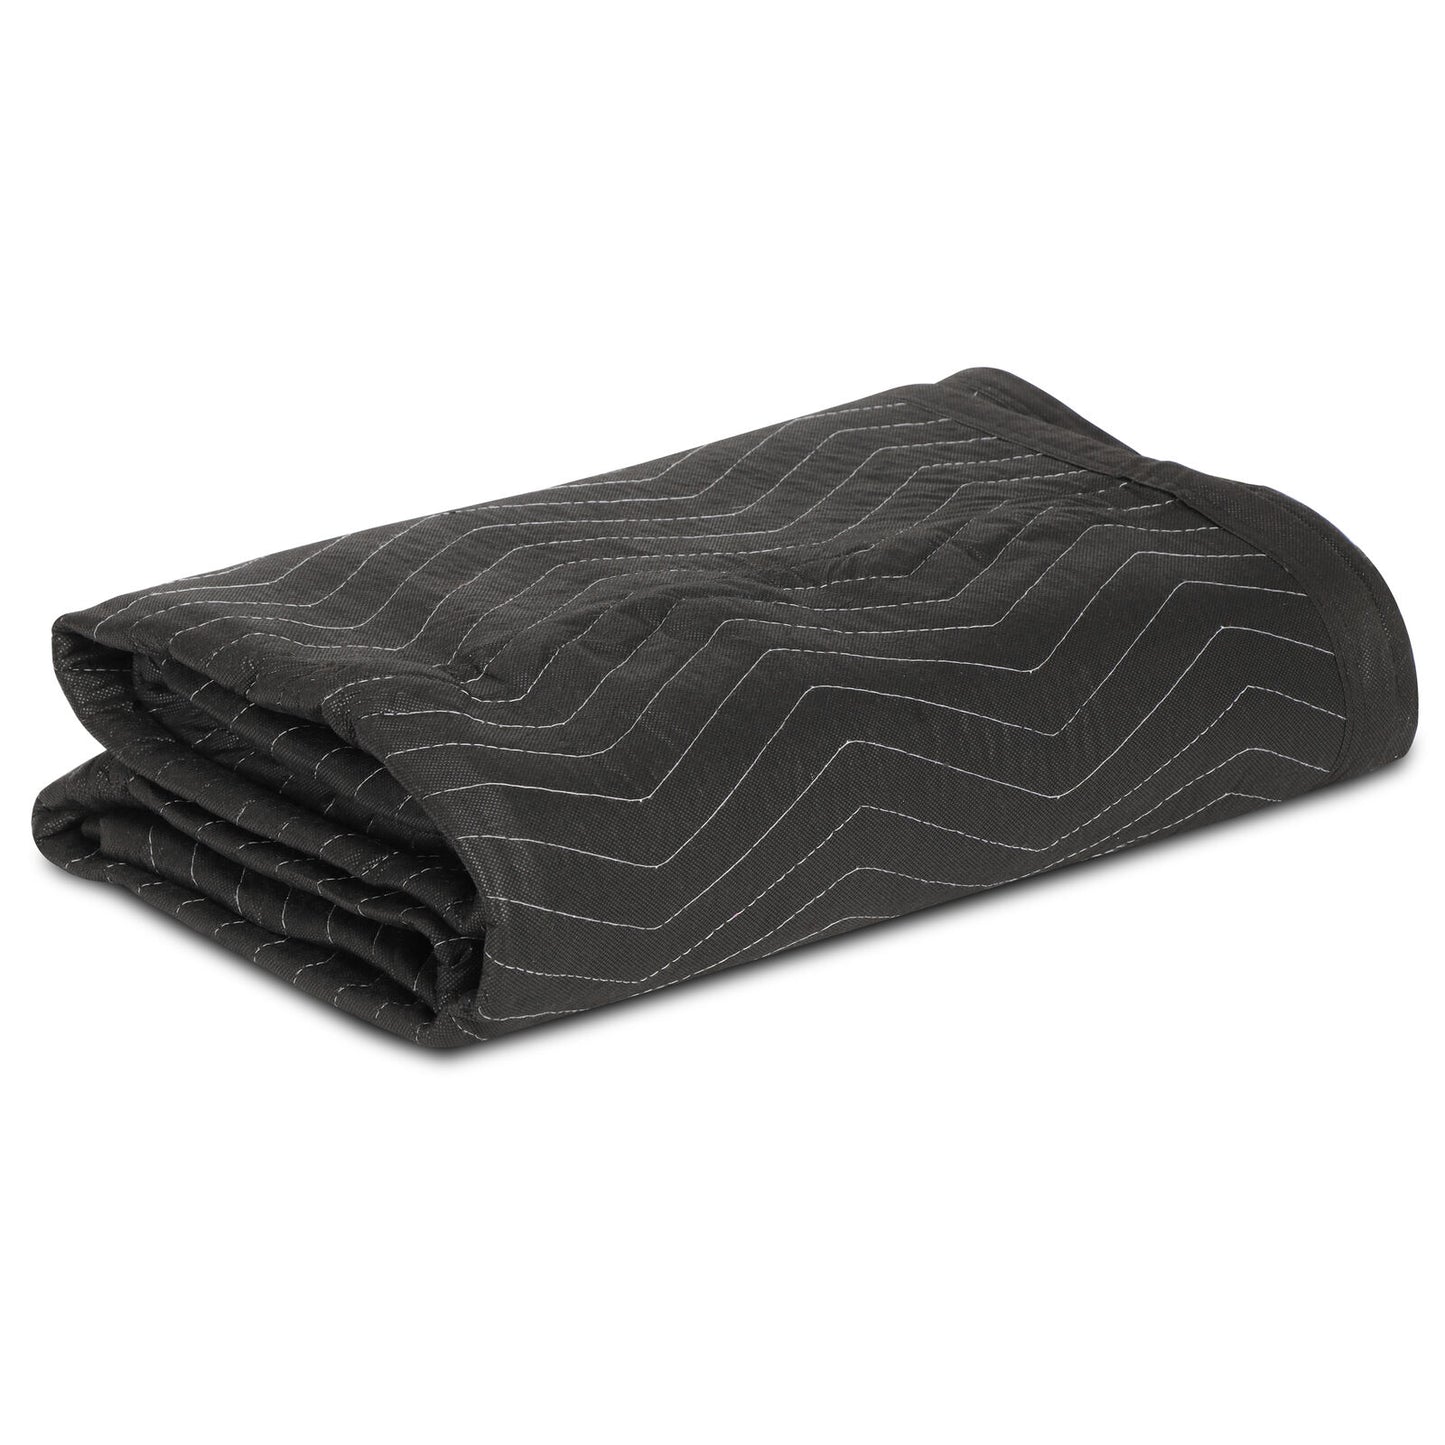 12 Pack Moving Blankets 80" x 72" Pro Economy Black Shipping Furniture Pads